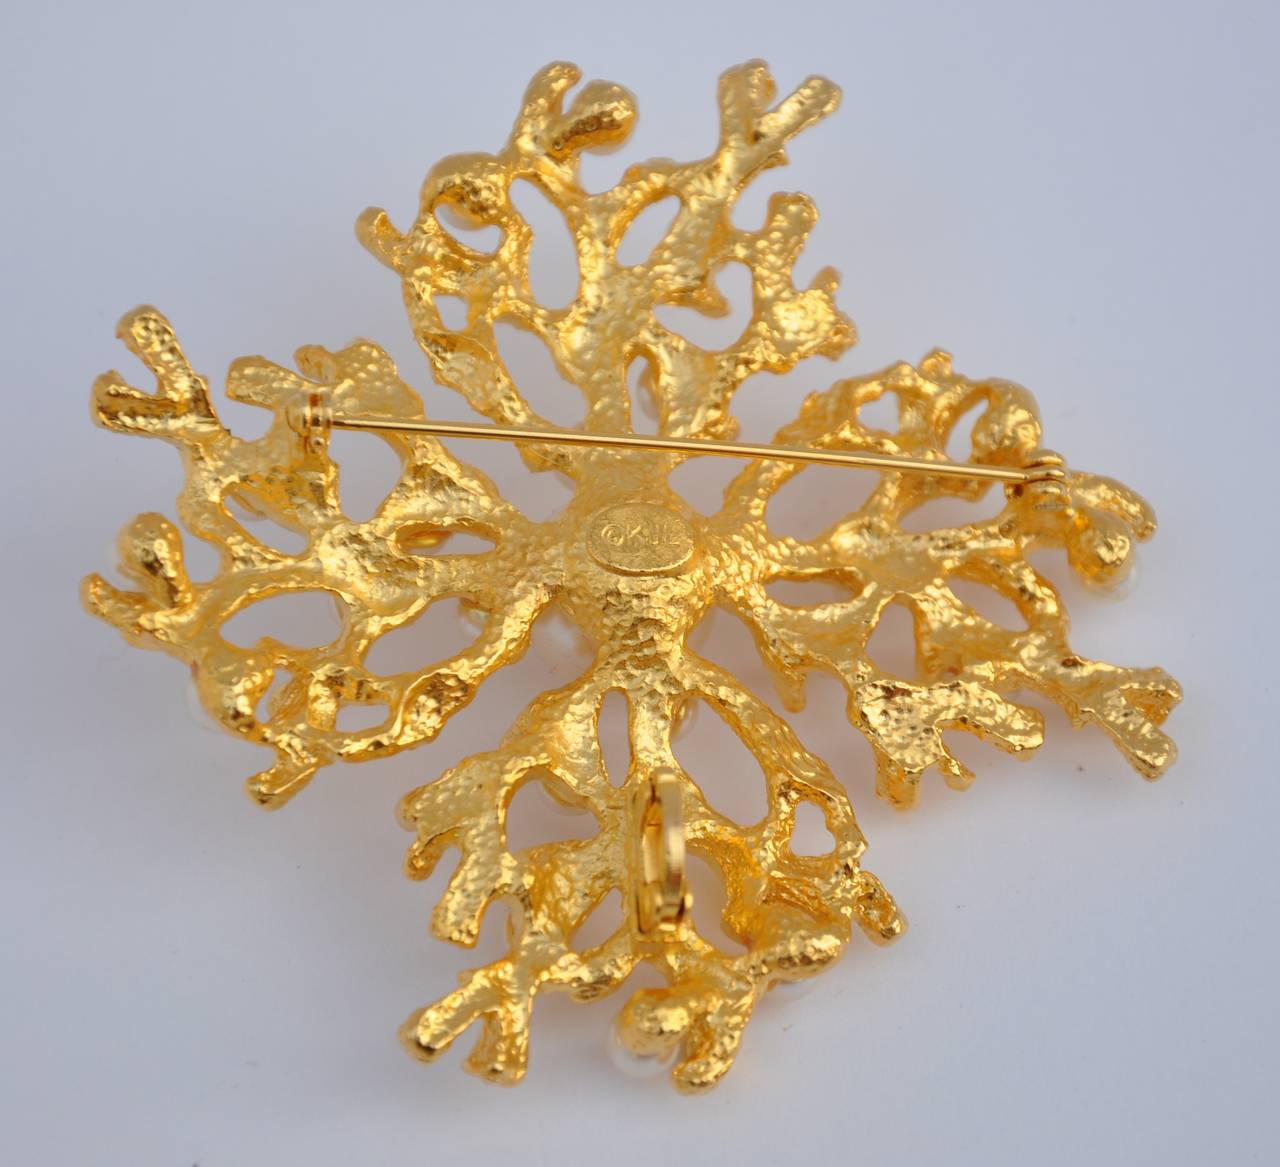 The famed Kenneth Jay Lane, who recently left us, created this wonderfully huge gilded gold vermeil finish brooch is paired with pearls, measuring 3" in length. The width measures 3" and the depth is 5/8".